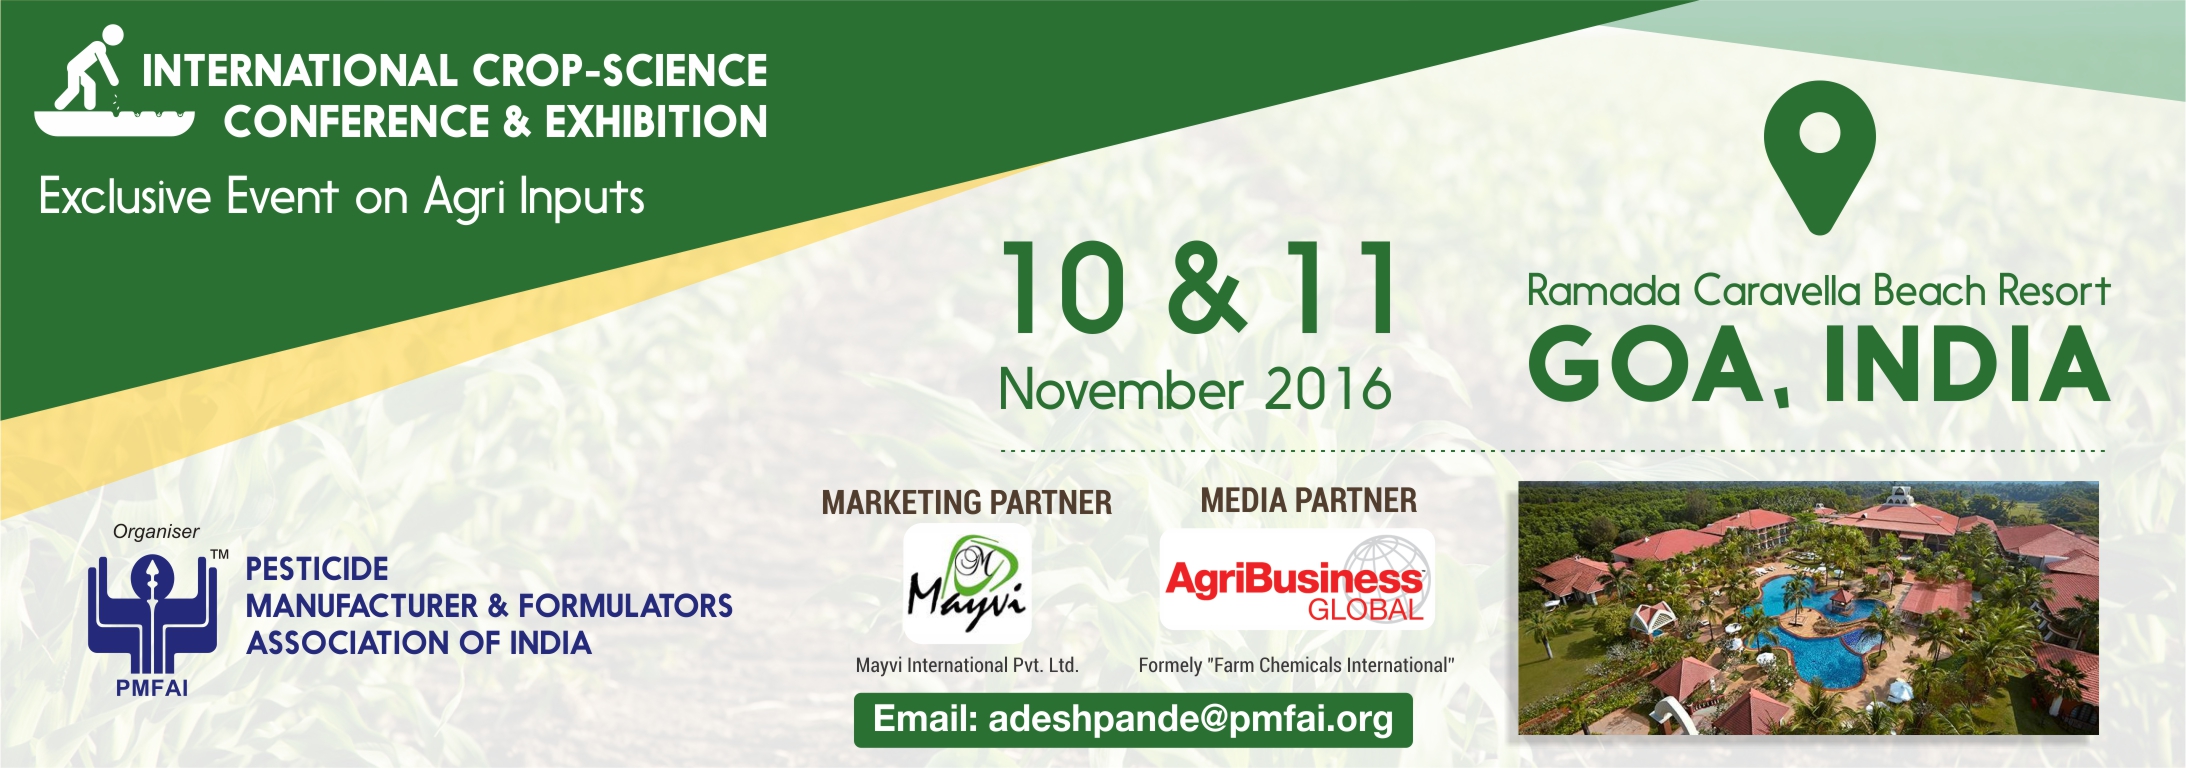 International Crop Science Conference and Exhibition- Agrochemical Event, South Goa, Goa, India